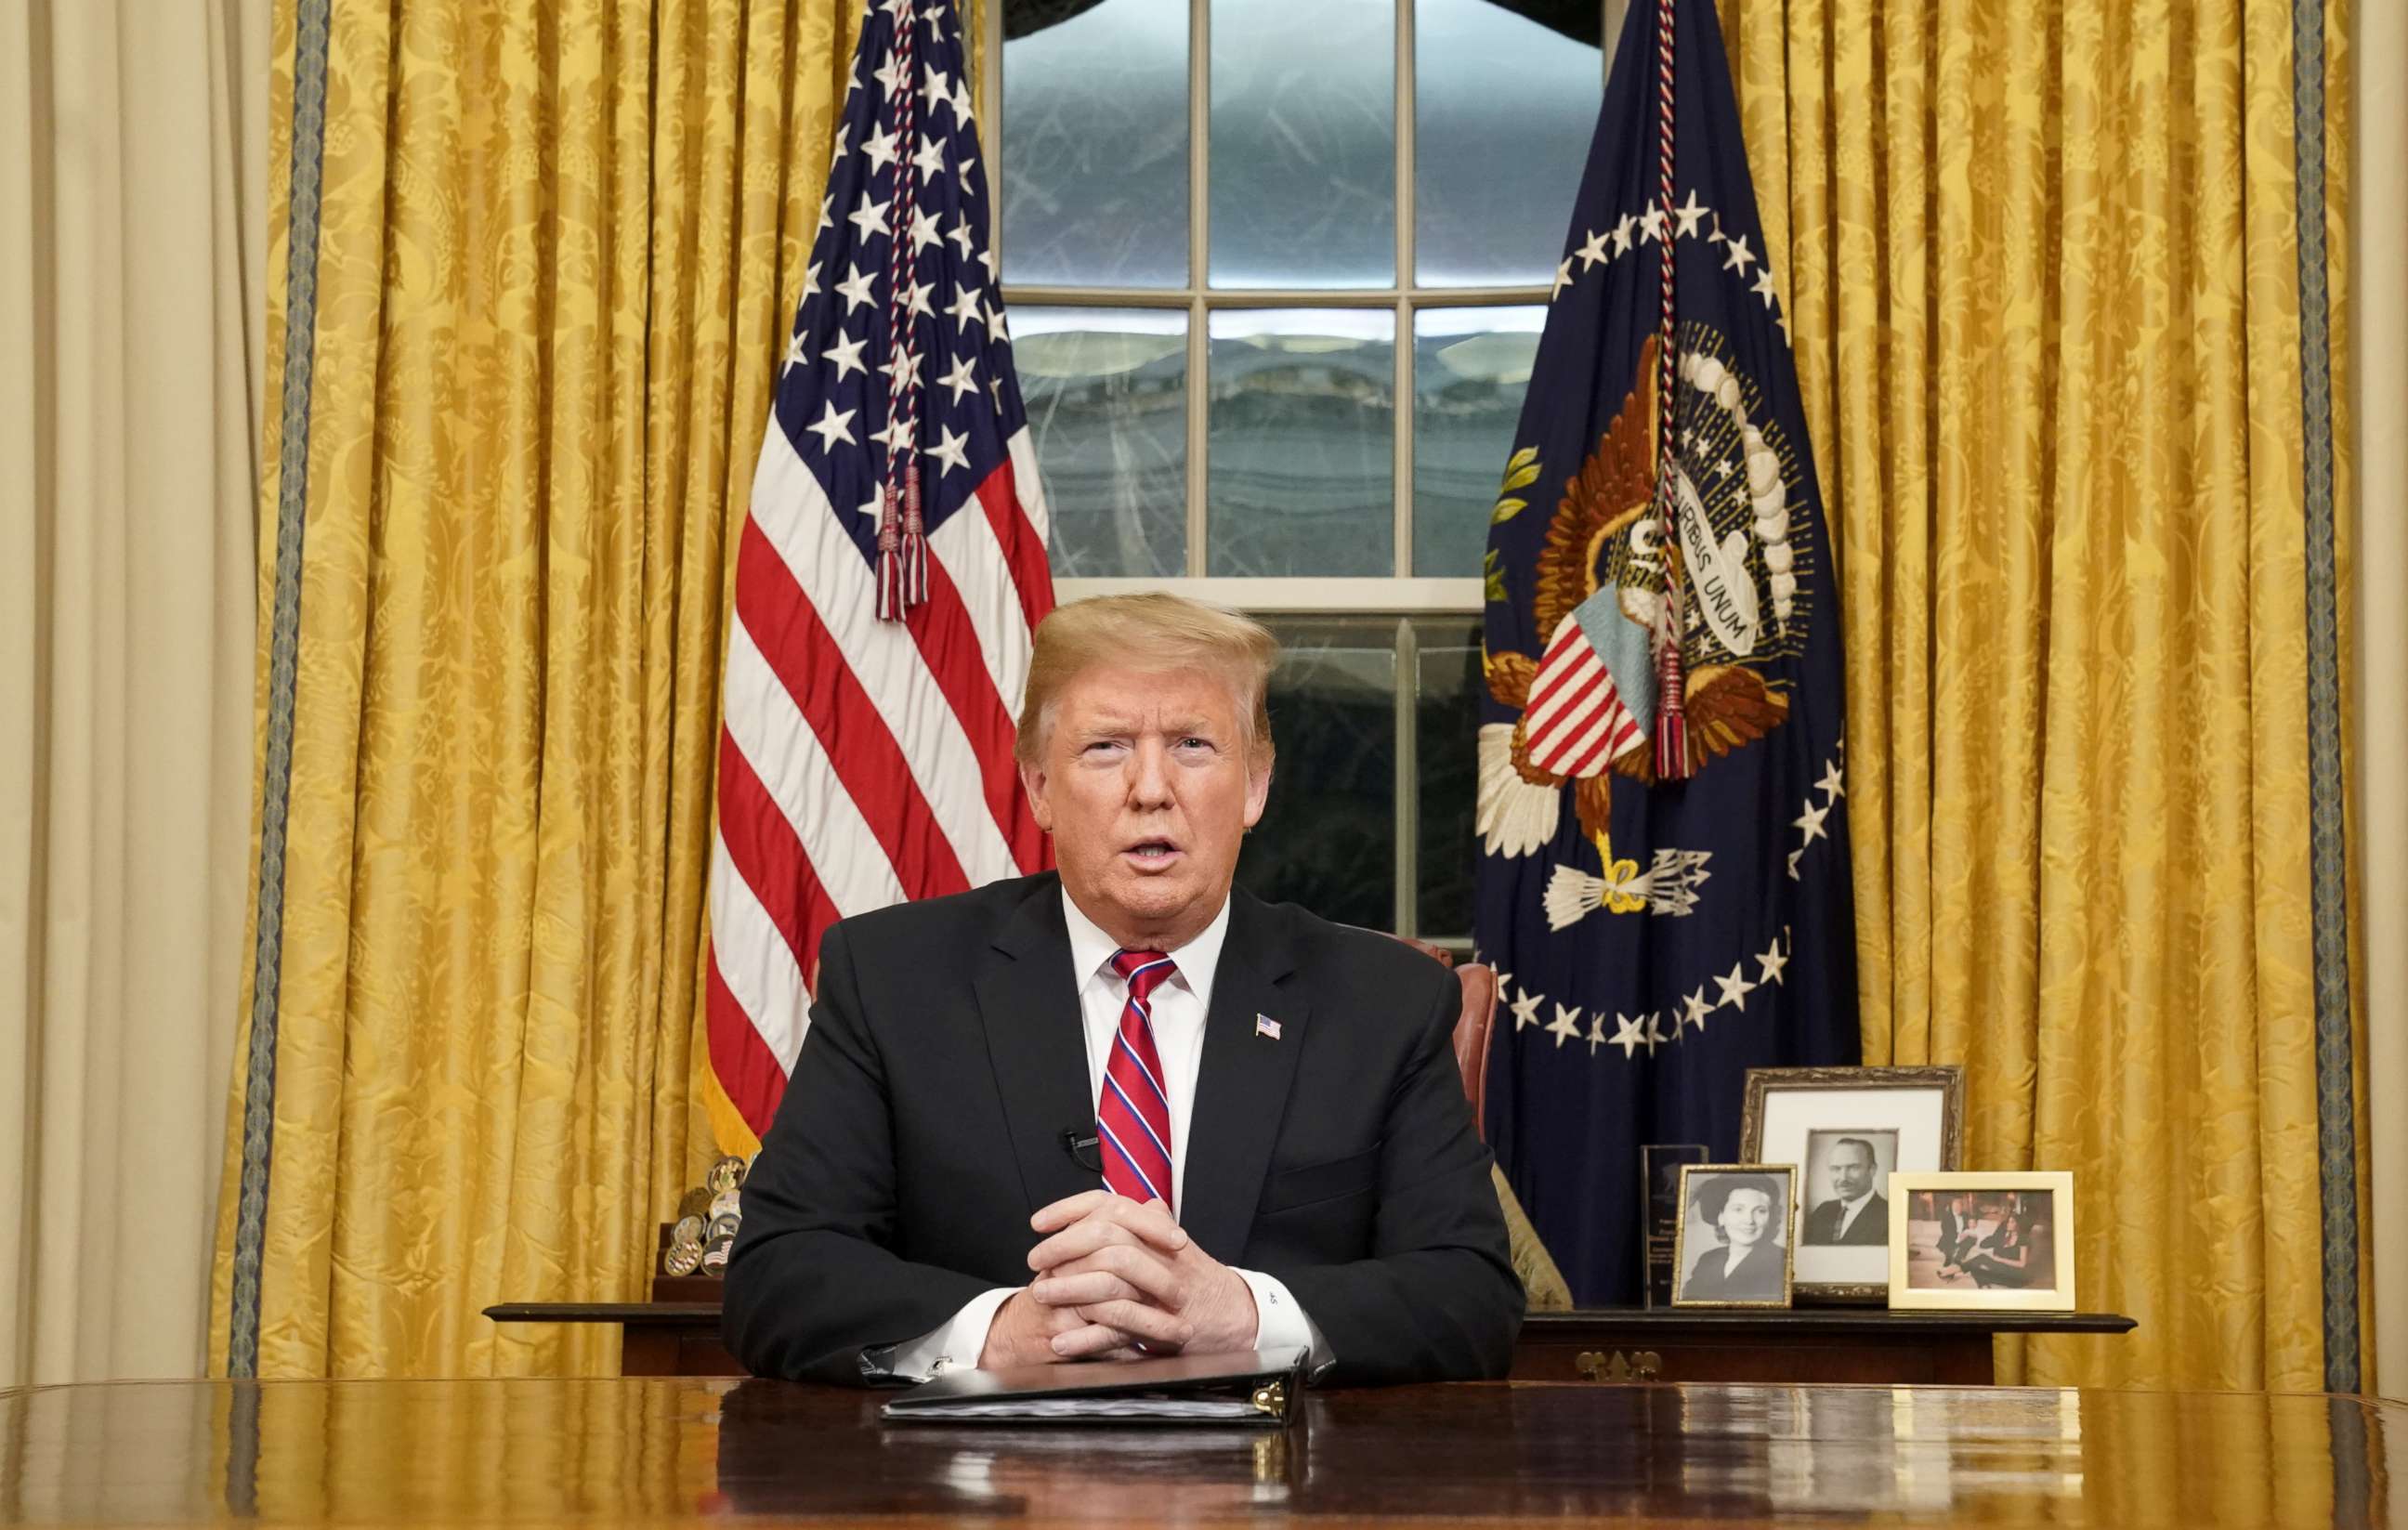 PHOTO: President Donald Trump deliver a televised address to the nation from his desk in the Oval Office about immigration and the southern U.S. border at the White House in Washington, Jan. 8, 2019.